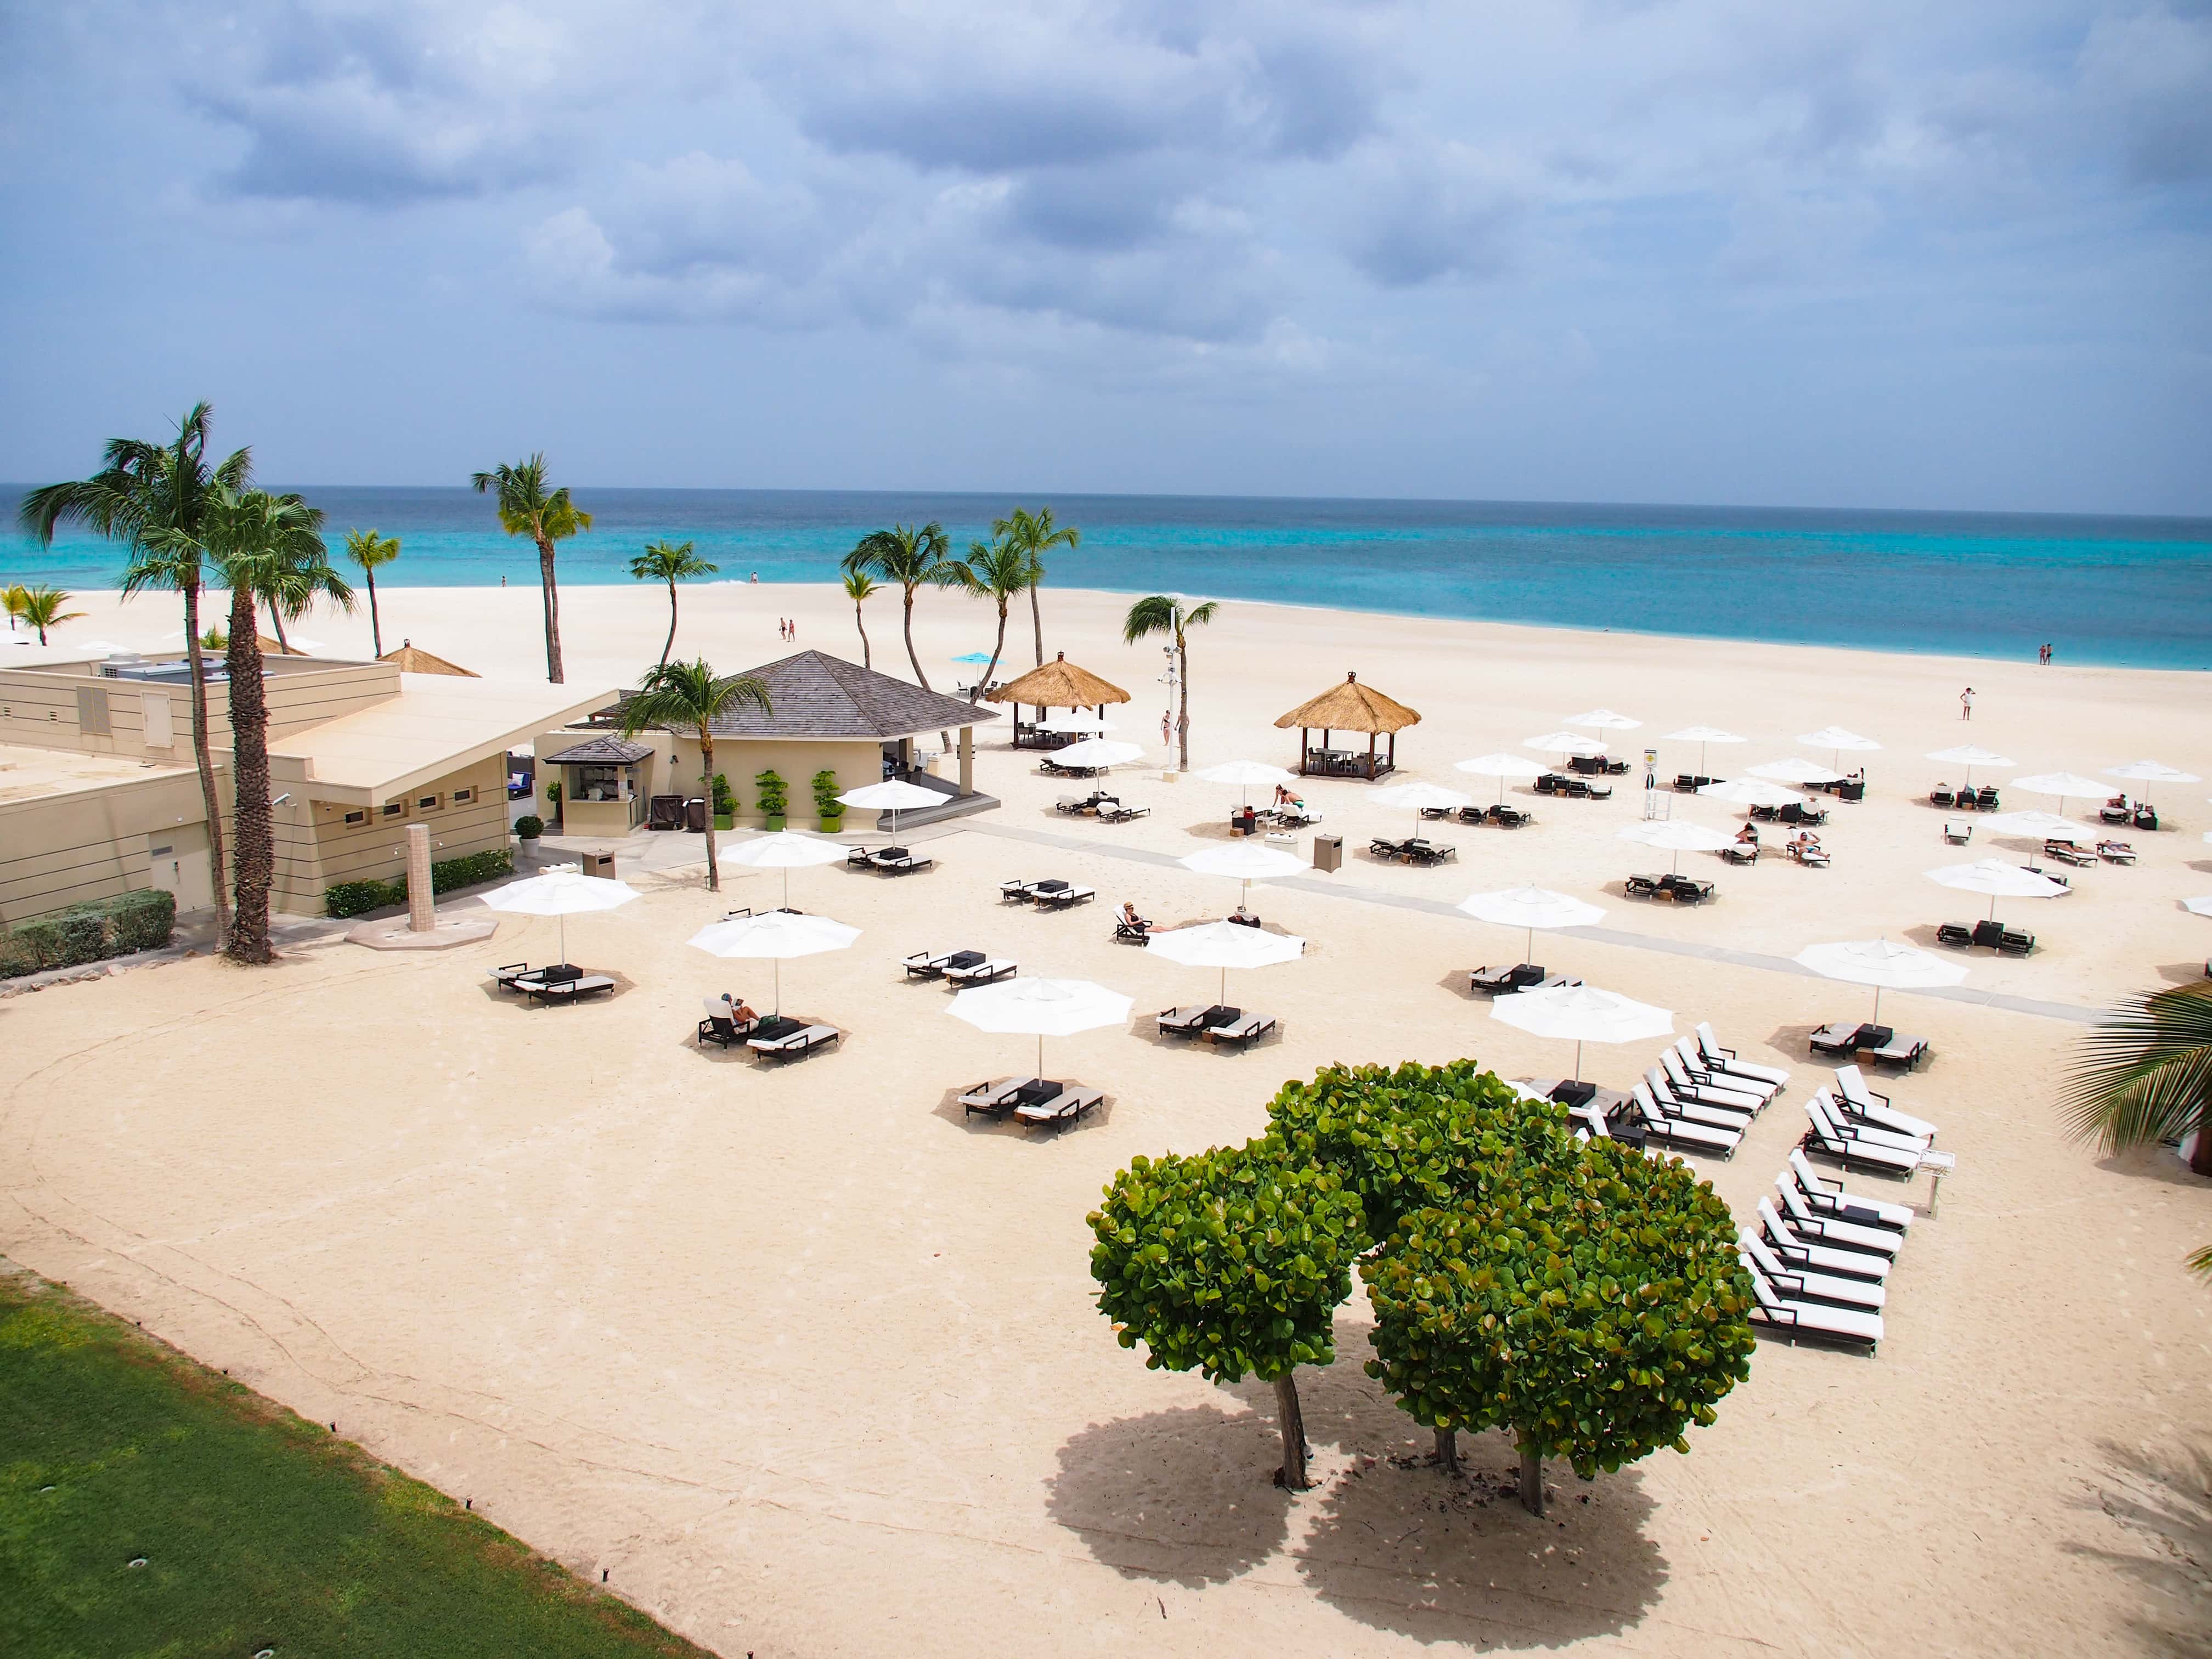 View from our suite in the Tara Suites section of the Bucuti & Tara Beach Resort, Aruba | SBPR